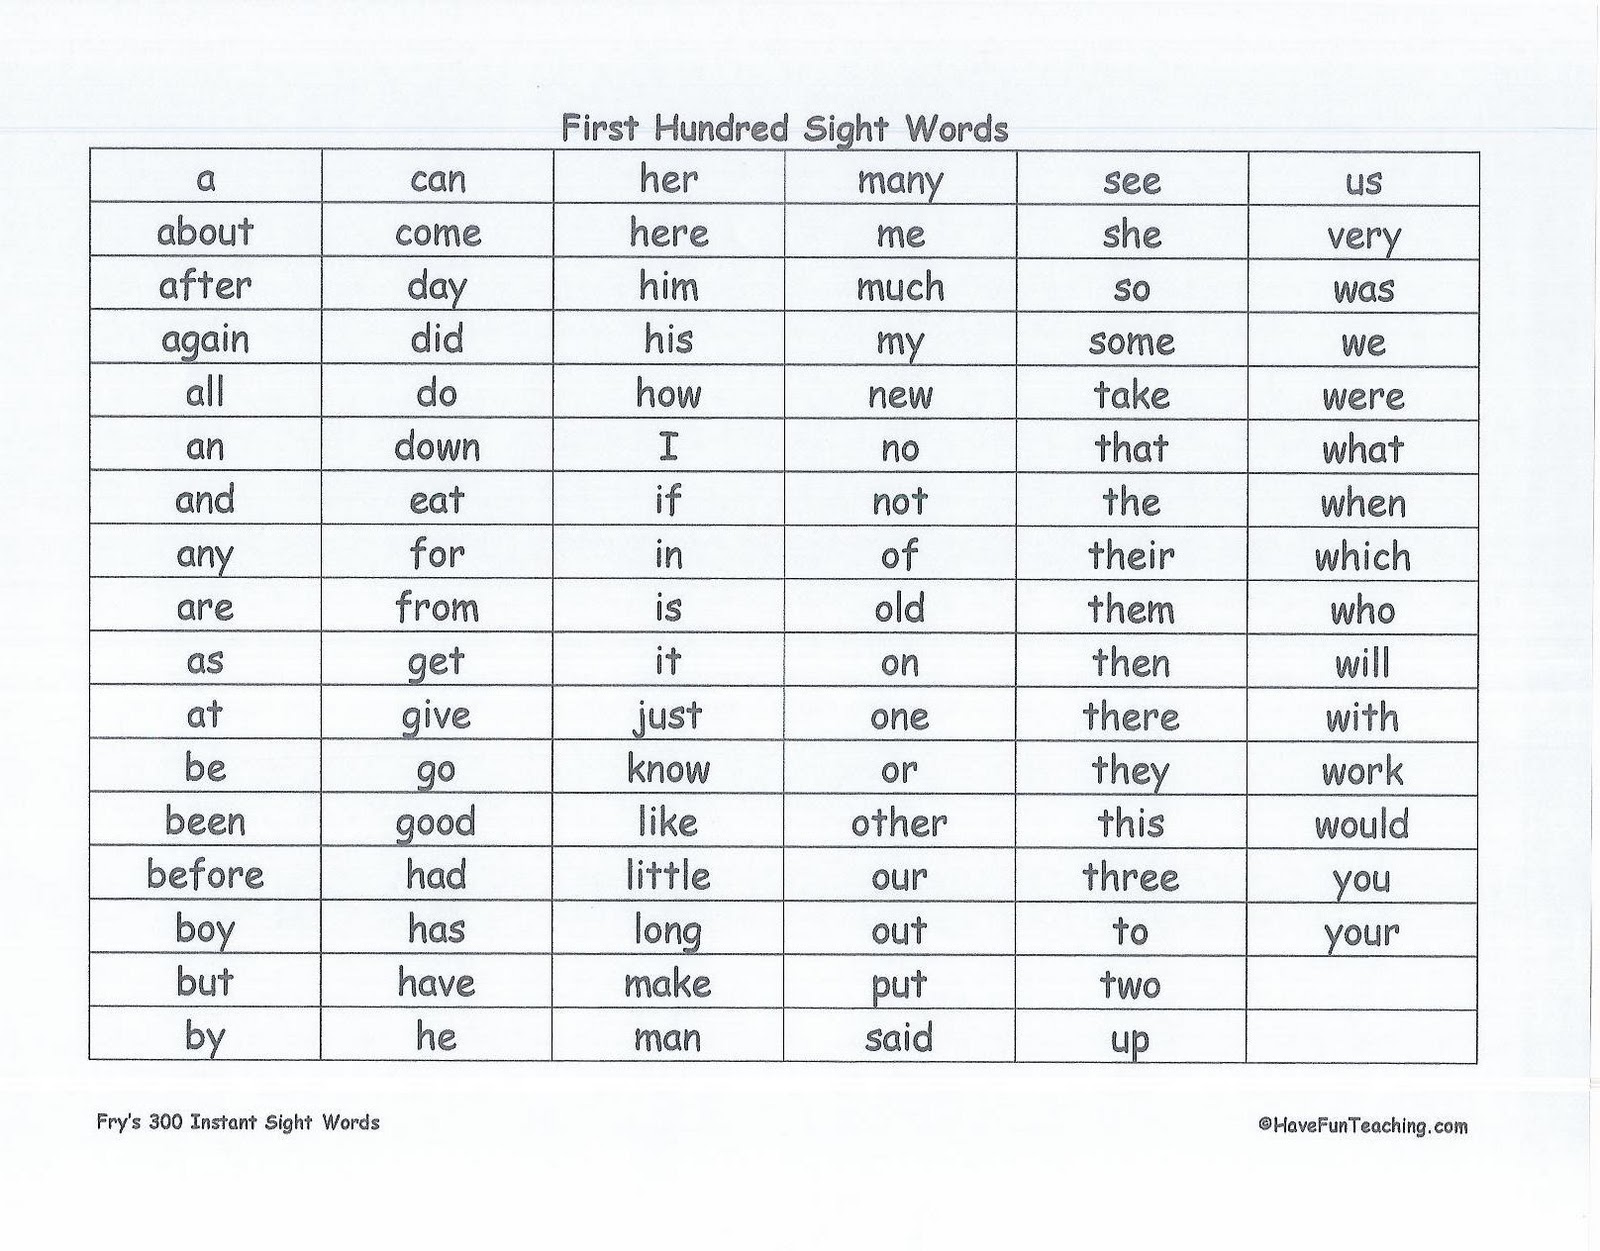 fantastic-fourth-grade-fry-s-300-instant-sight-word-list